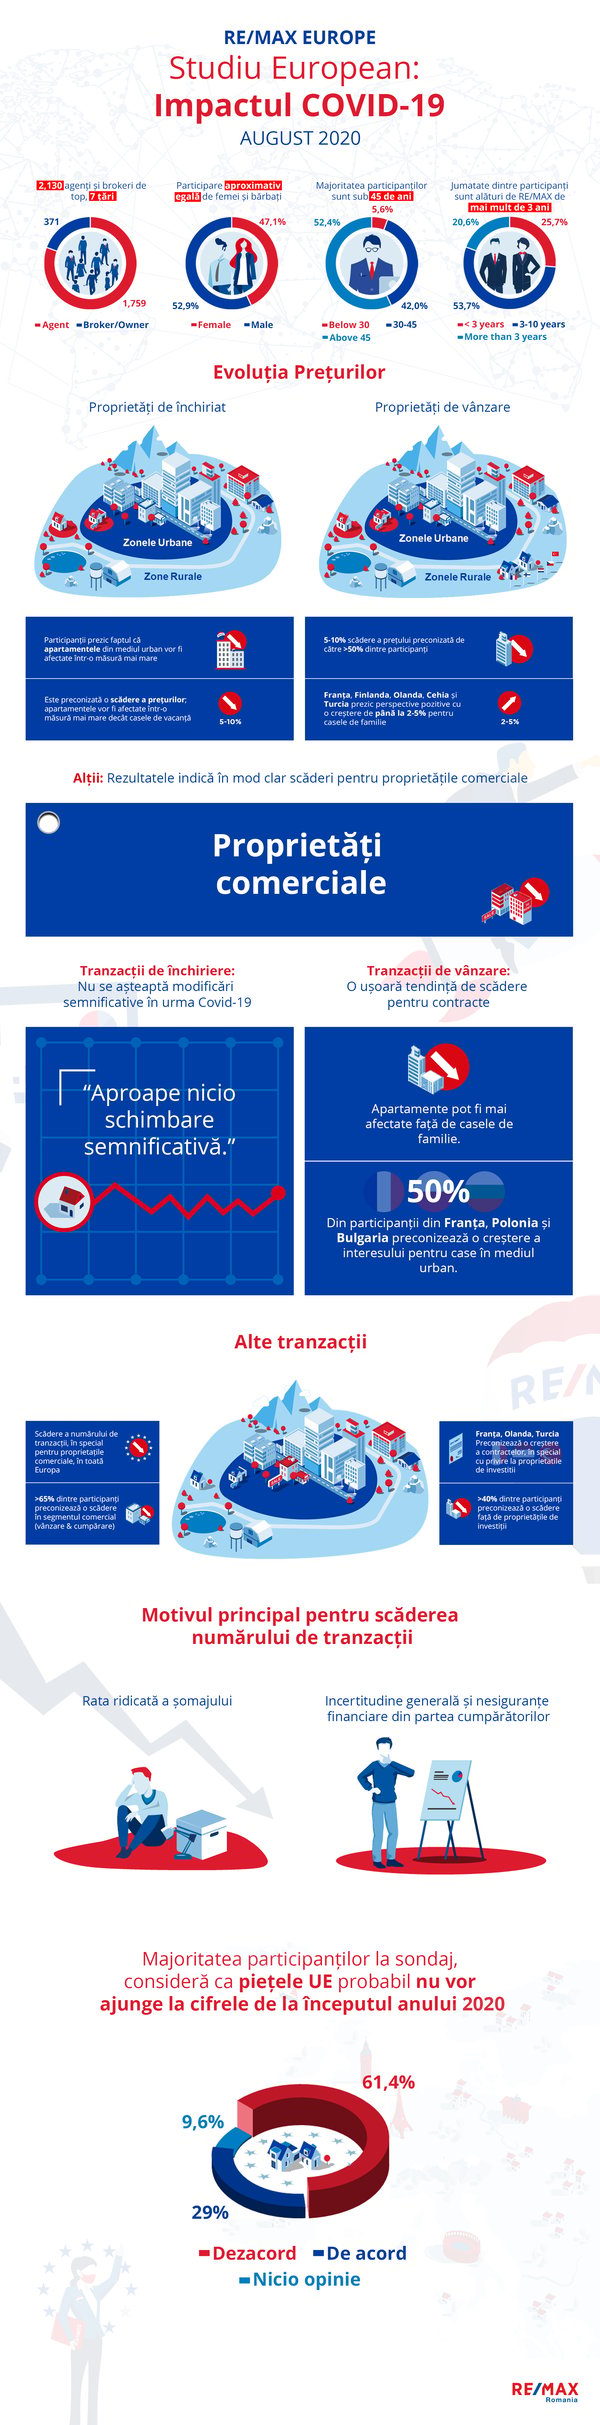 infographic European real estate market in 2020 - remax study